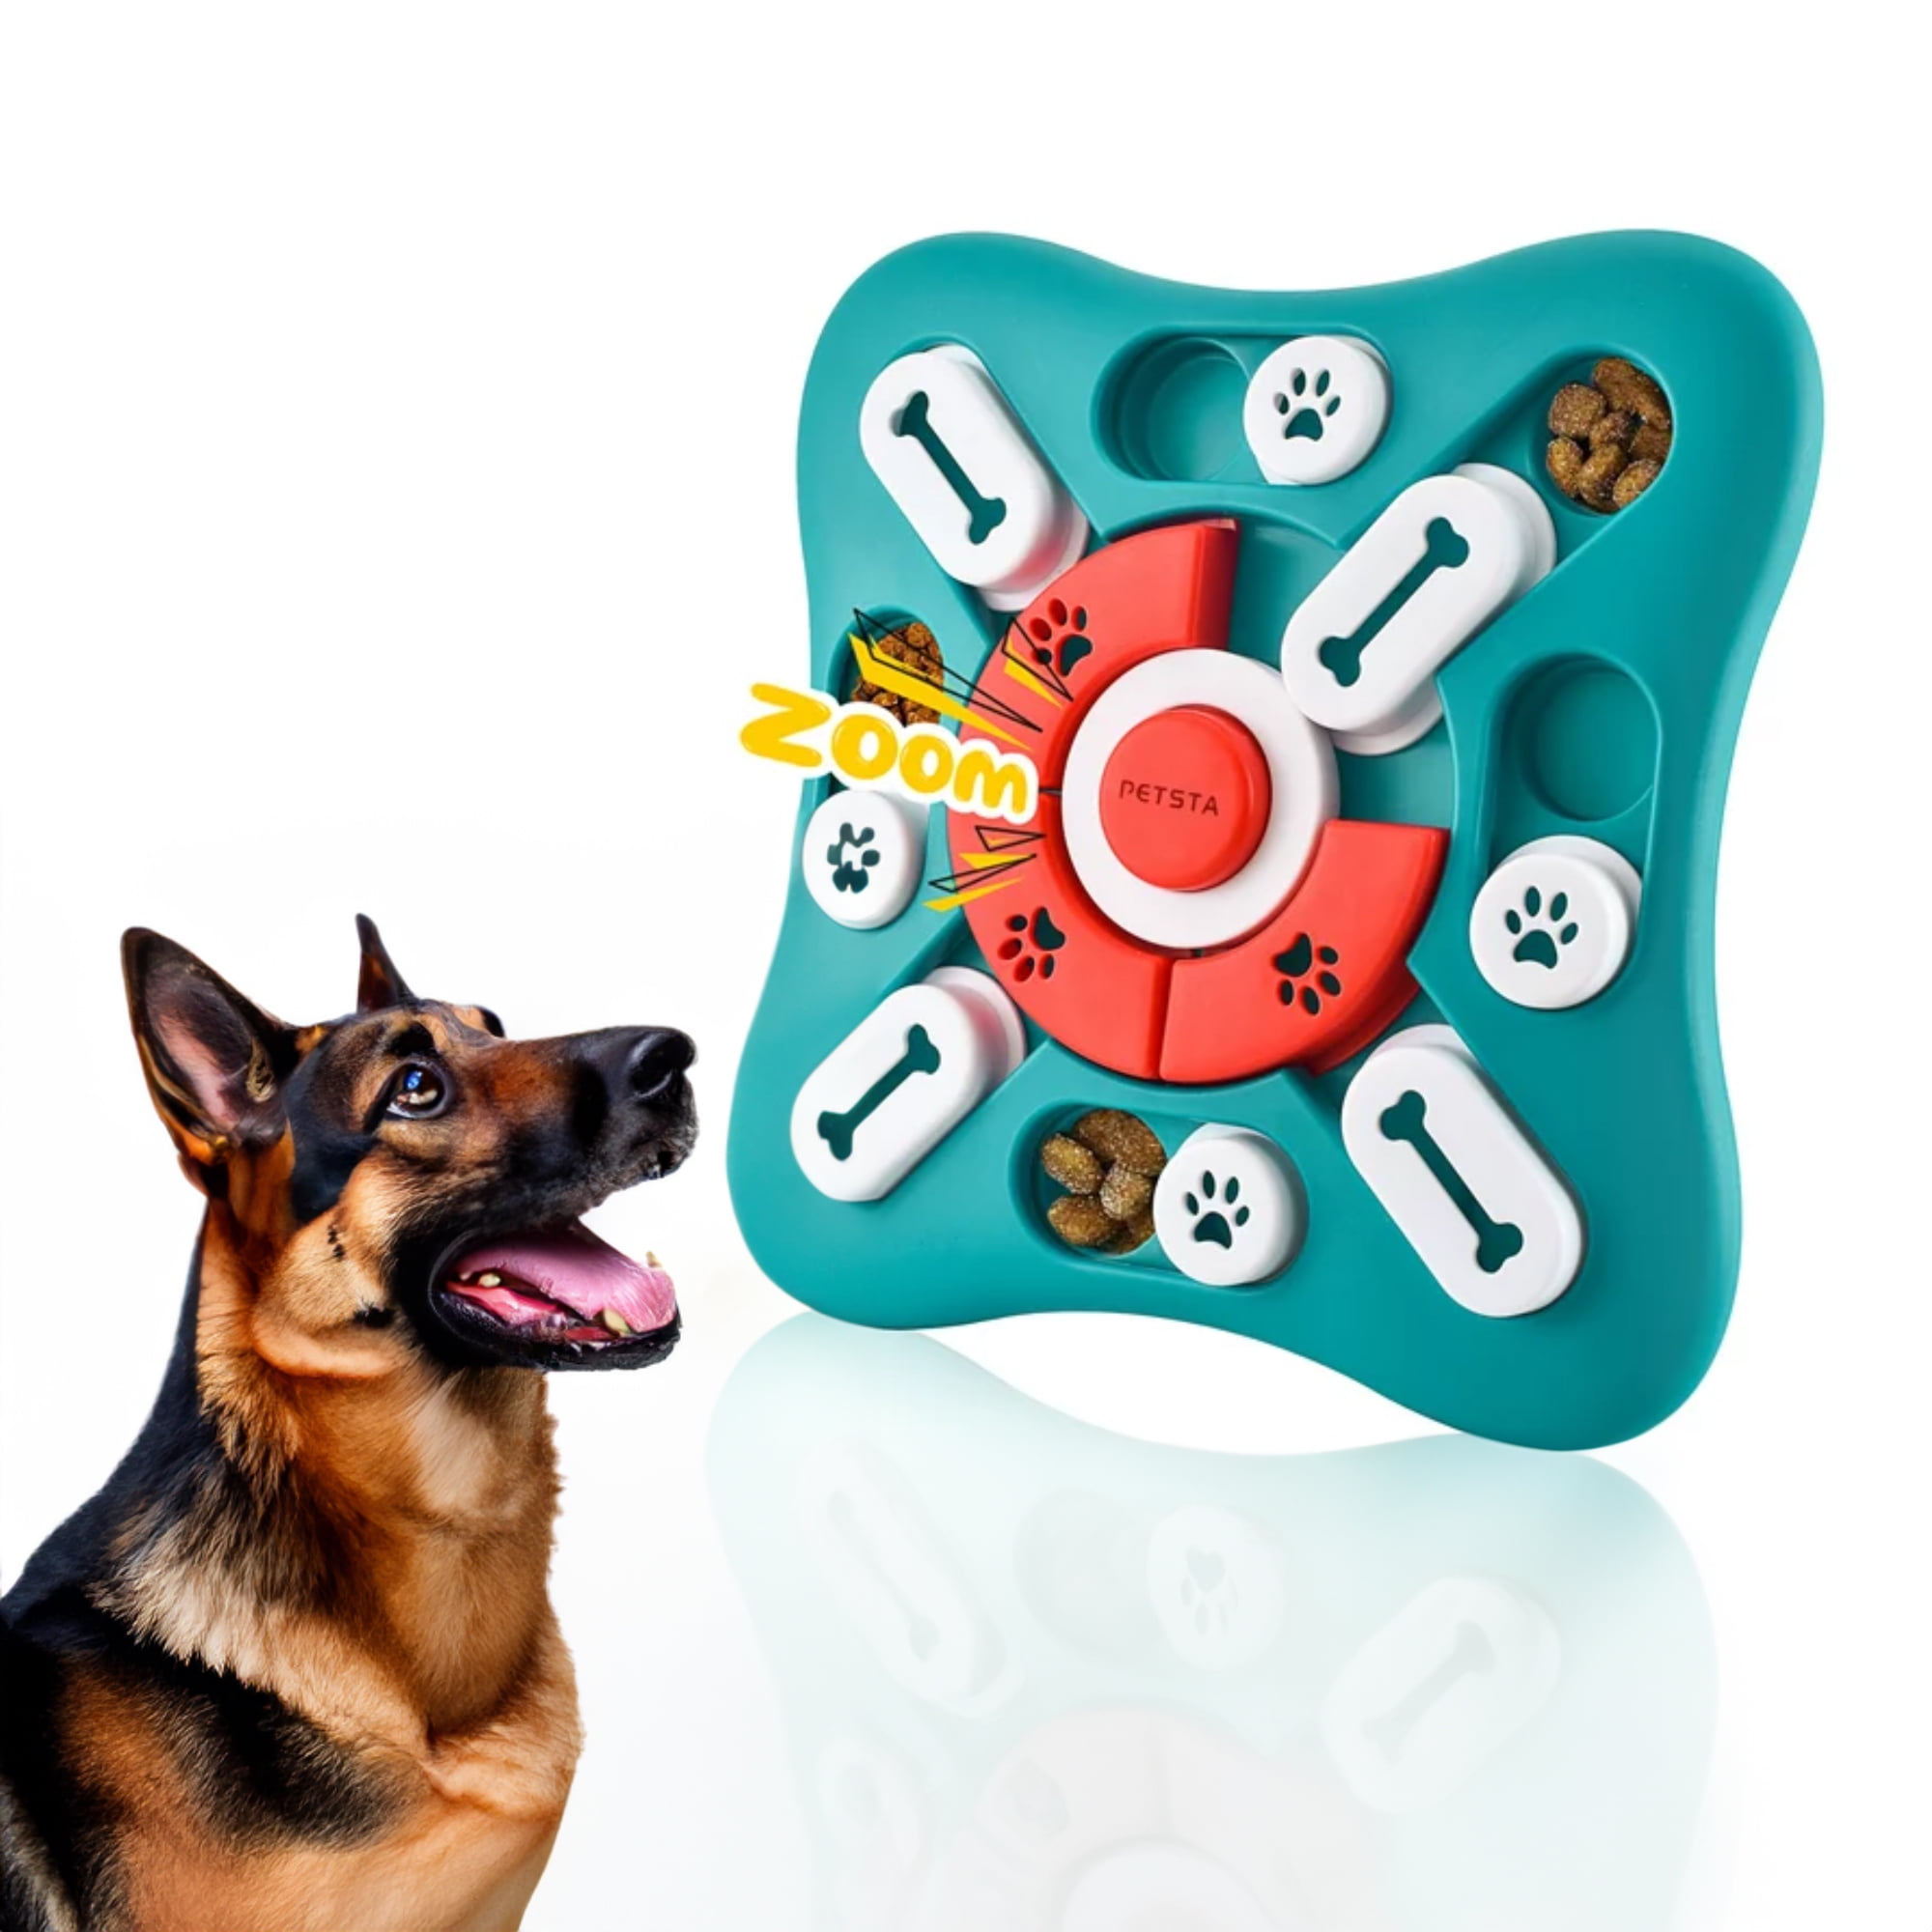 CALHNNA Dog Puzzle Toys - Interactive Dog Toys for Treat Training Mentally  Stimulation Dog Gifts Enrichment Toys for Puppy Small Medium Large Dogs